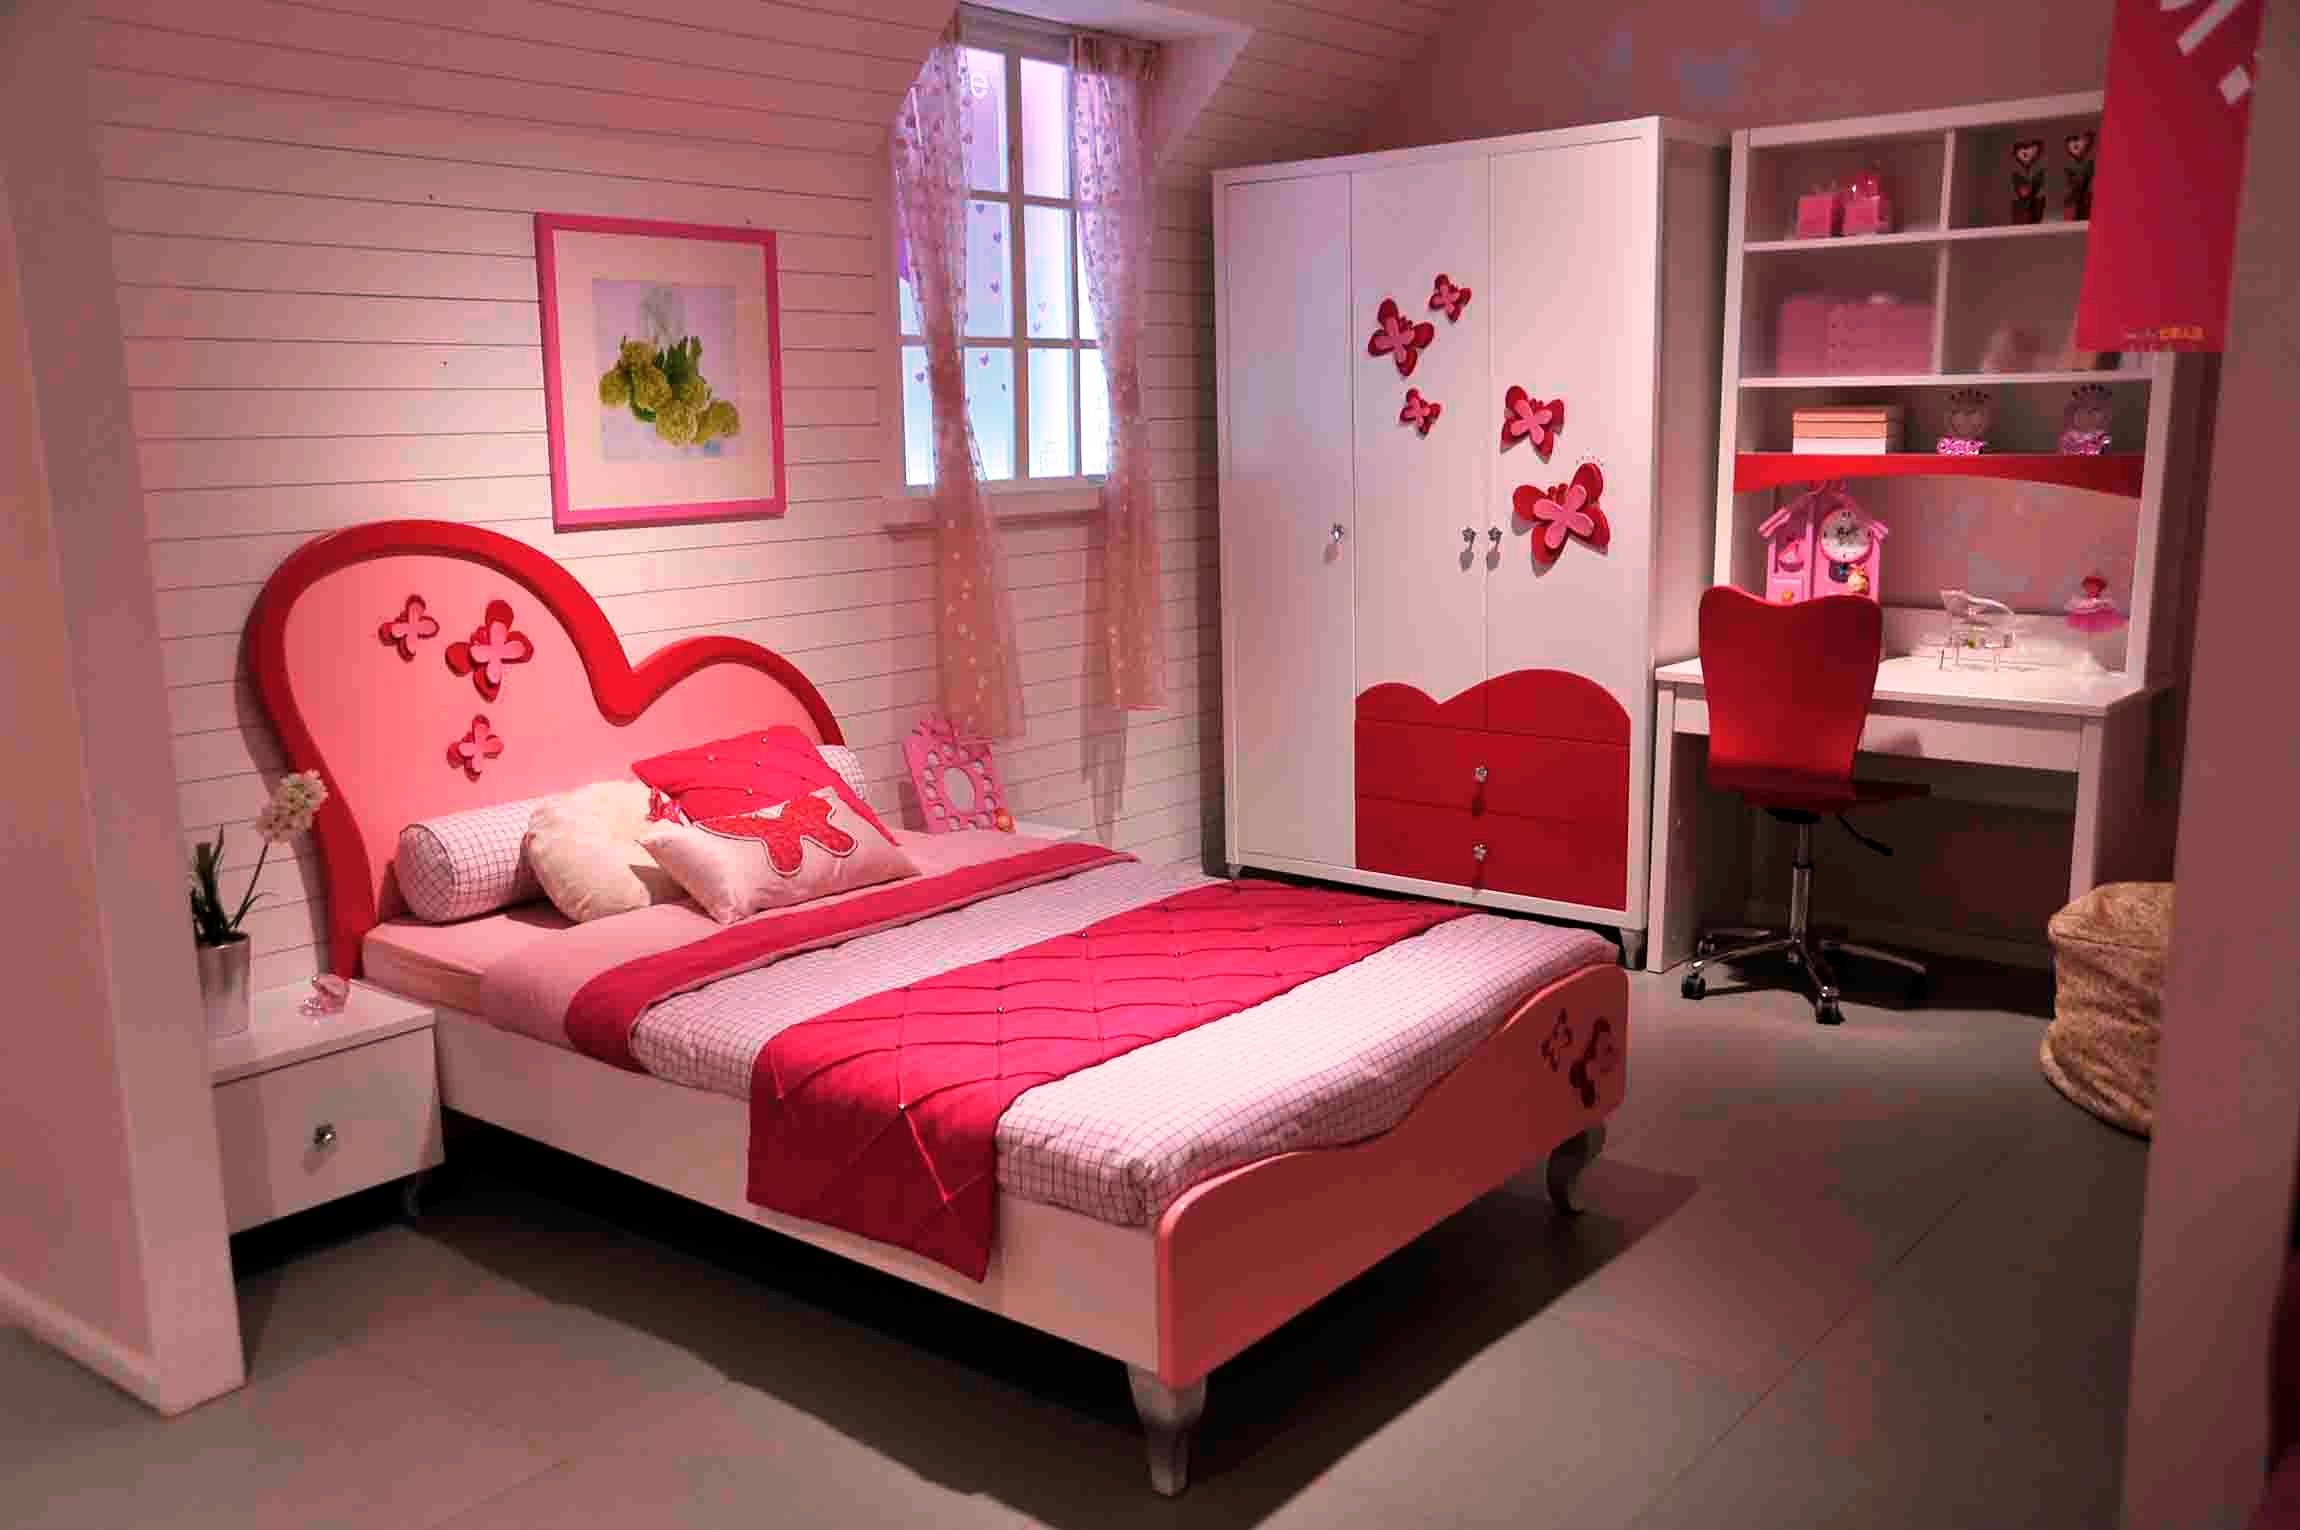 2300x1530 Modern Pinky Interior Design Of Te Kids Room With Cool Paint Ideas For Rooms  And Dominated ...